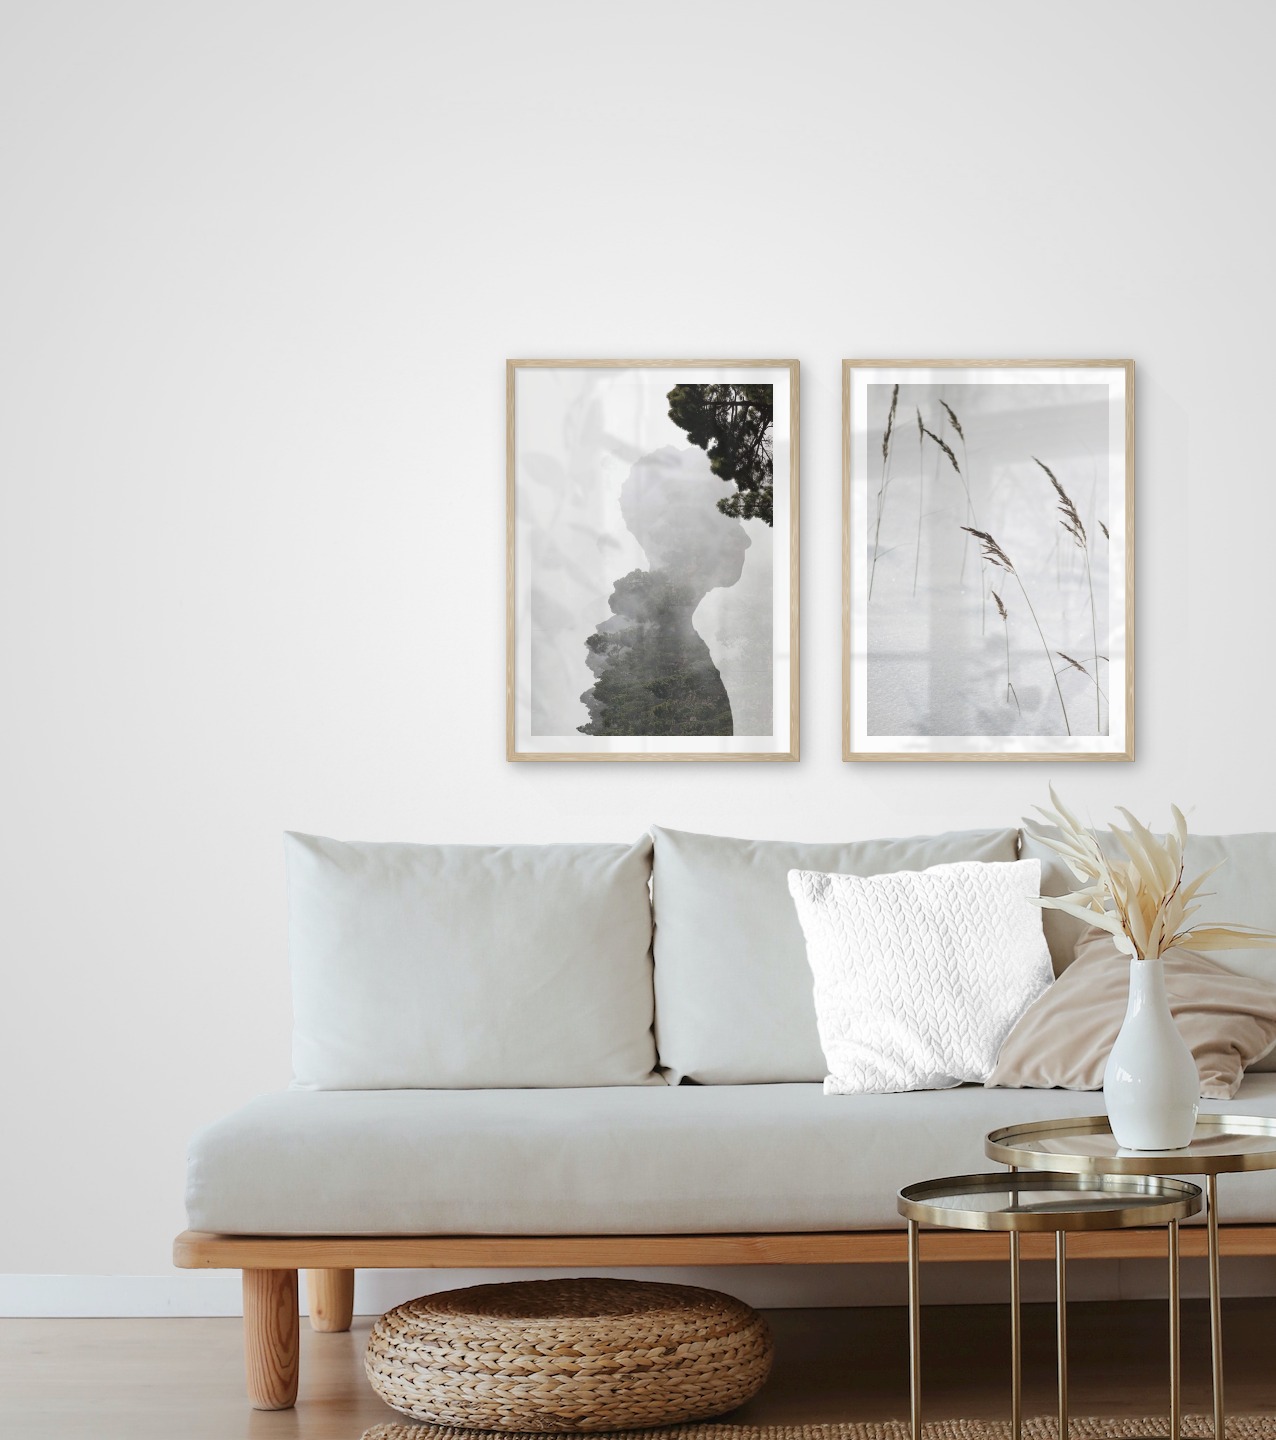 Gallery wall with picture frames in wood in sizes 50x70 with prints "Silhouette and tree" and "Sharp in the snow"